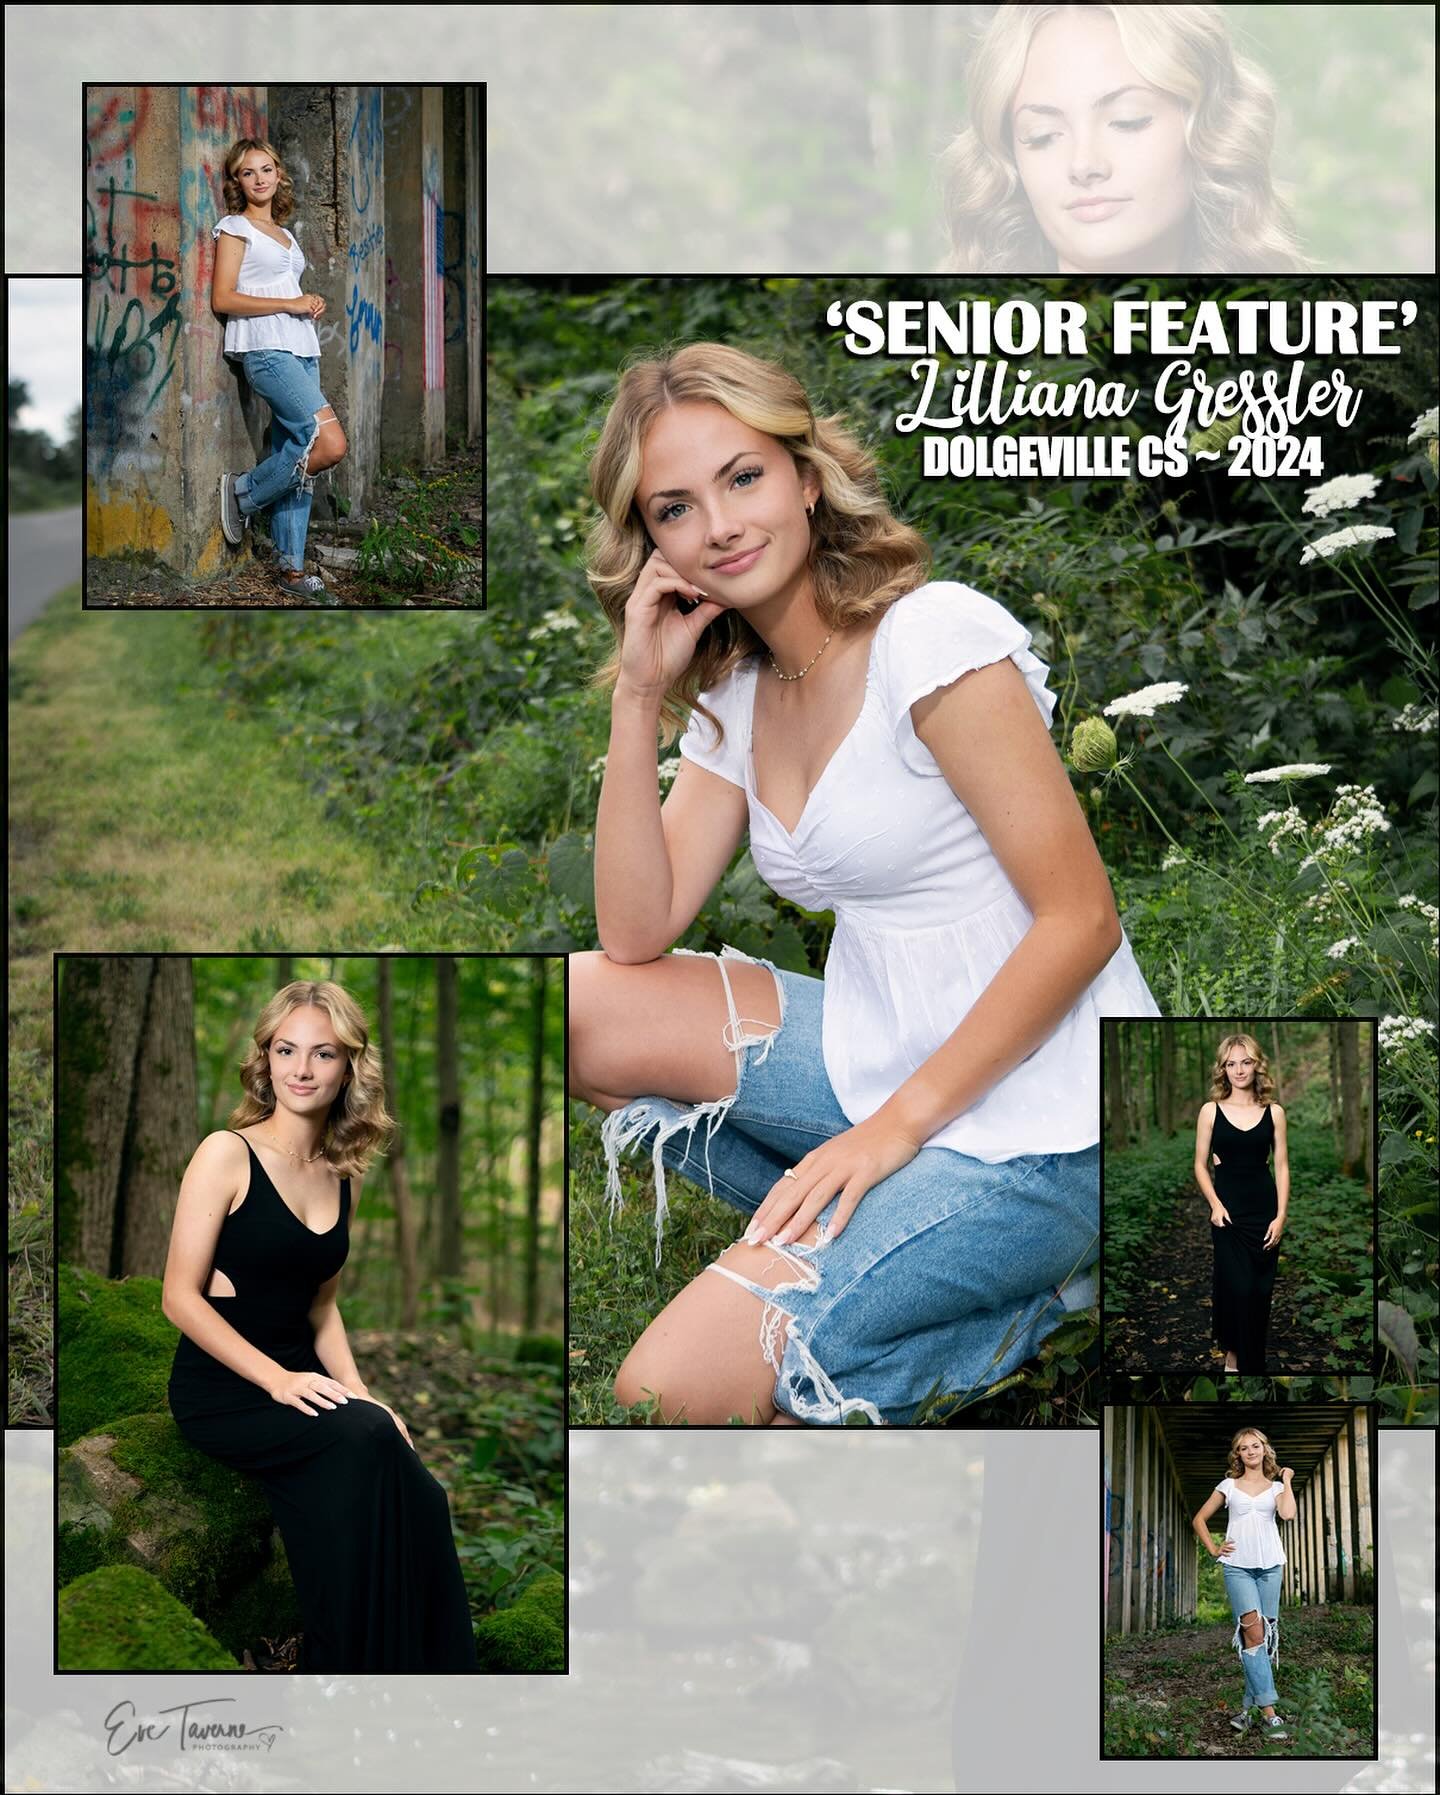 SENIOR FEATURE! Lilliana Gressler 
Dolgeville Central School 
#Classof2024
#ETPSeniorFeature
@lillianagressler 

Congratulations Lilly on your high school career, and all the best to you on your future endeavors. I&rsquo;m so grateful for the opportu